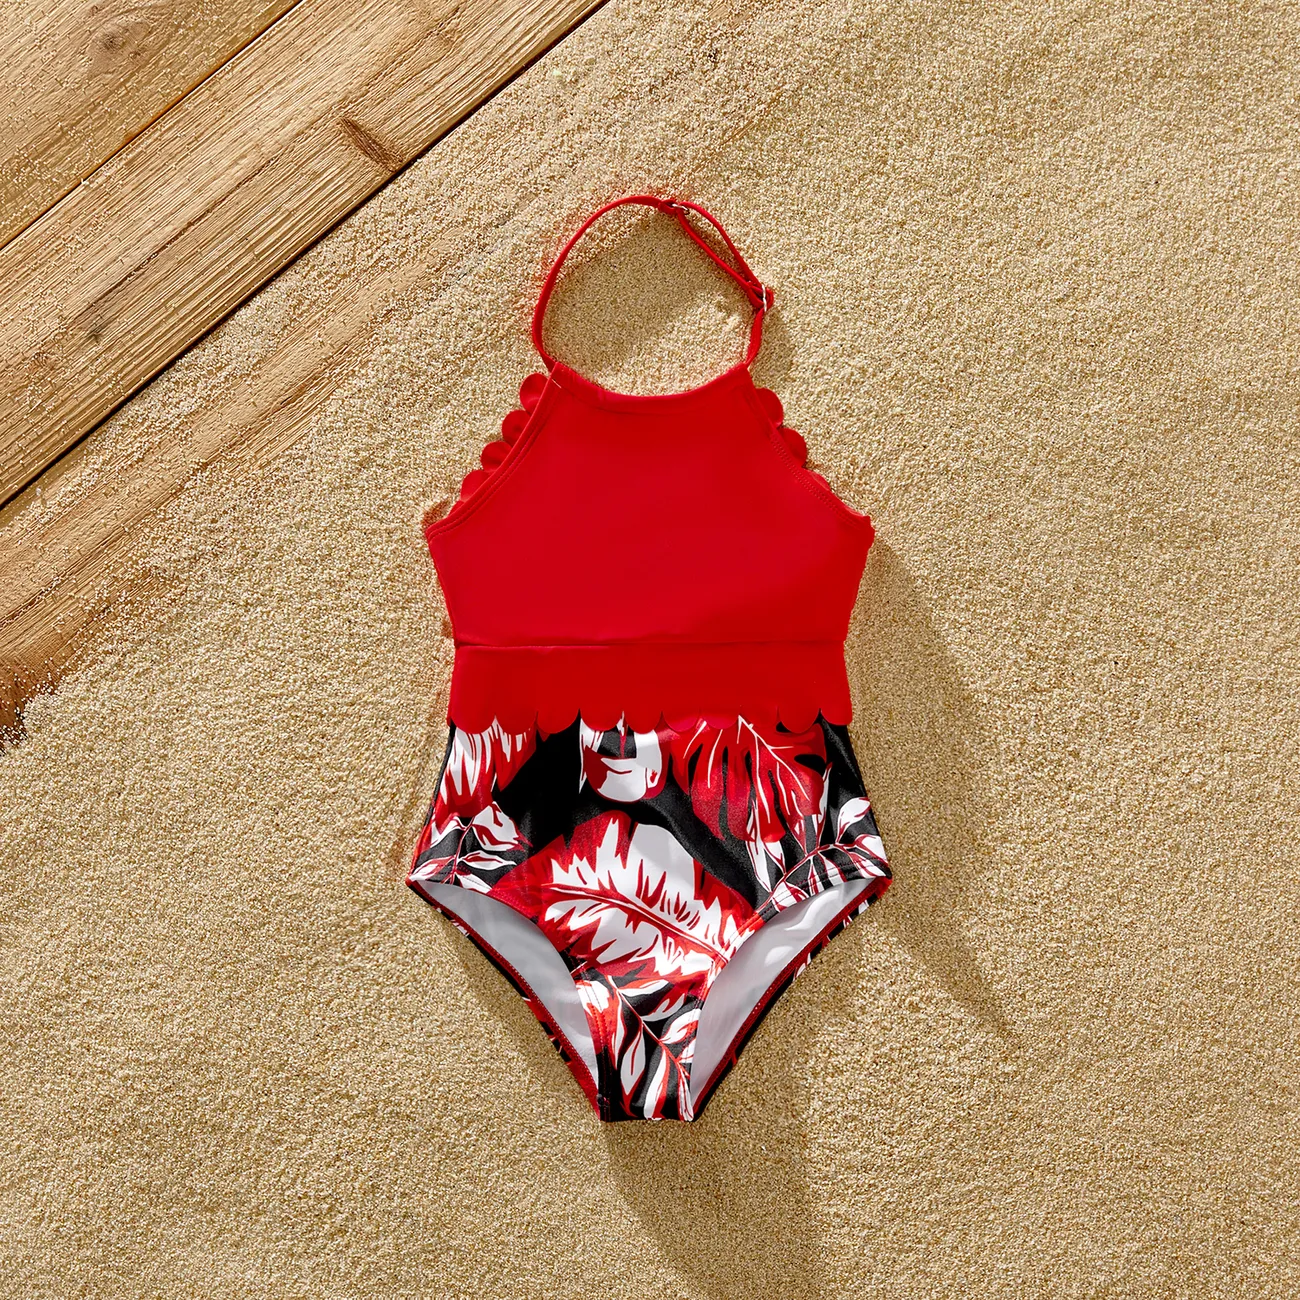 Family Matching Allover Plant Print Swim Trunks and Scallop Trim One-piece Swimsuit Red-2 big image 1